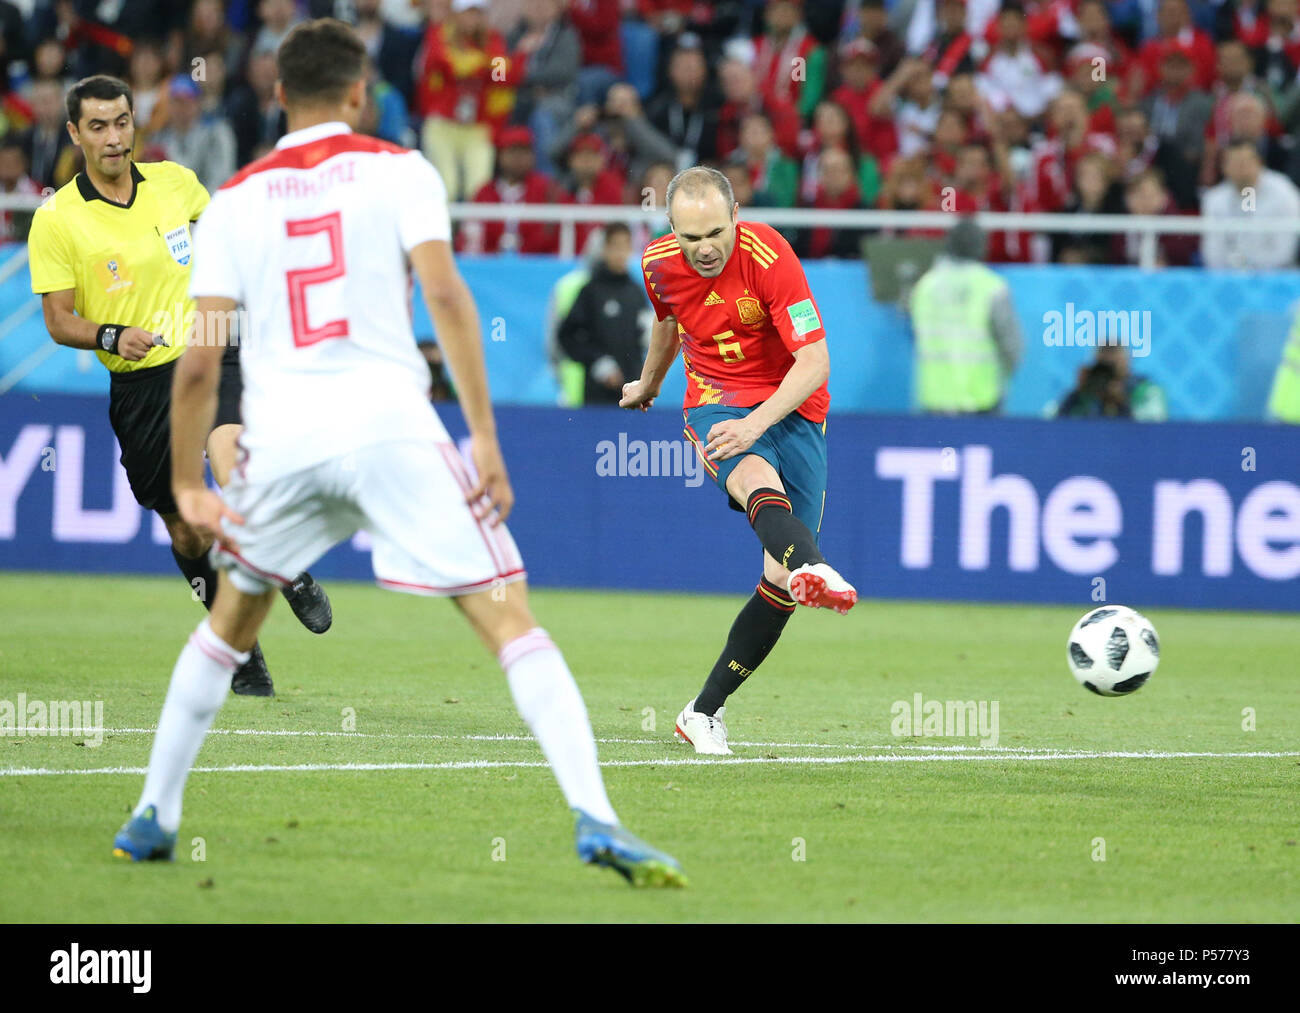 Kaliningrad, Russia. 25th June, 2018. Andres Iniesta (R) of Spain shoots during the 2018 FIFA World Cup Group B match between Spain and Morocco in Kaliningrad, Russia, June 25, 2018. Credit: Li Ming/Xinhua/Alamy Live News Stock Photo